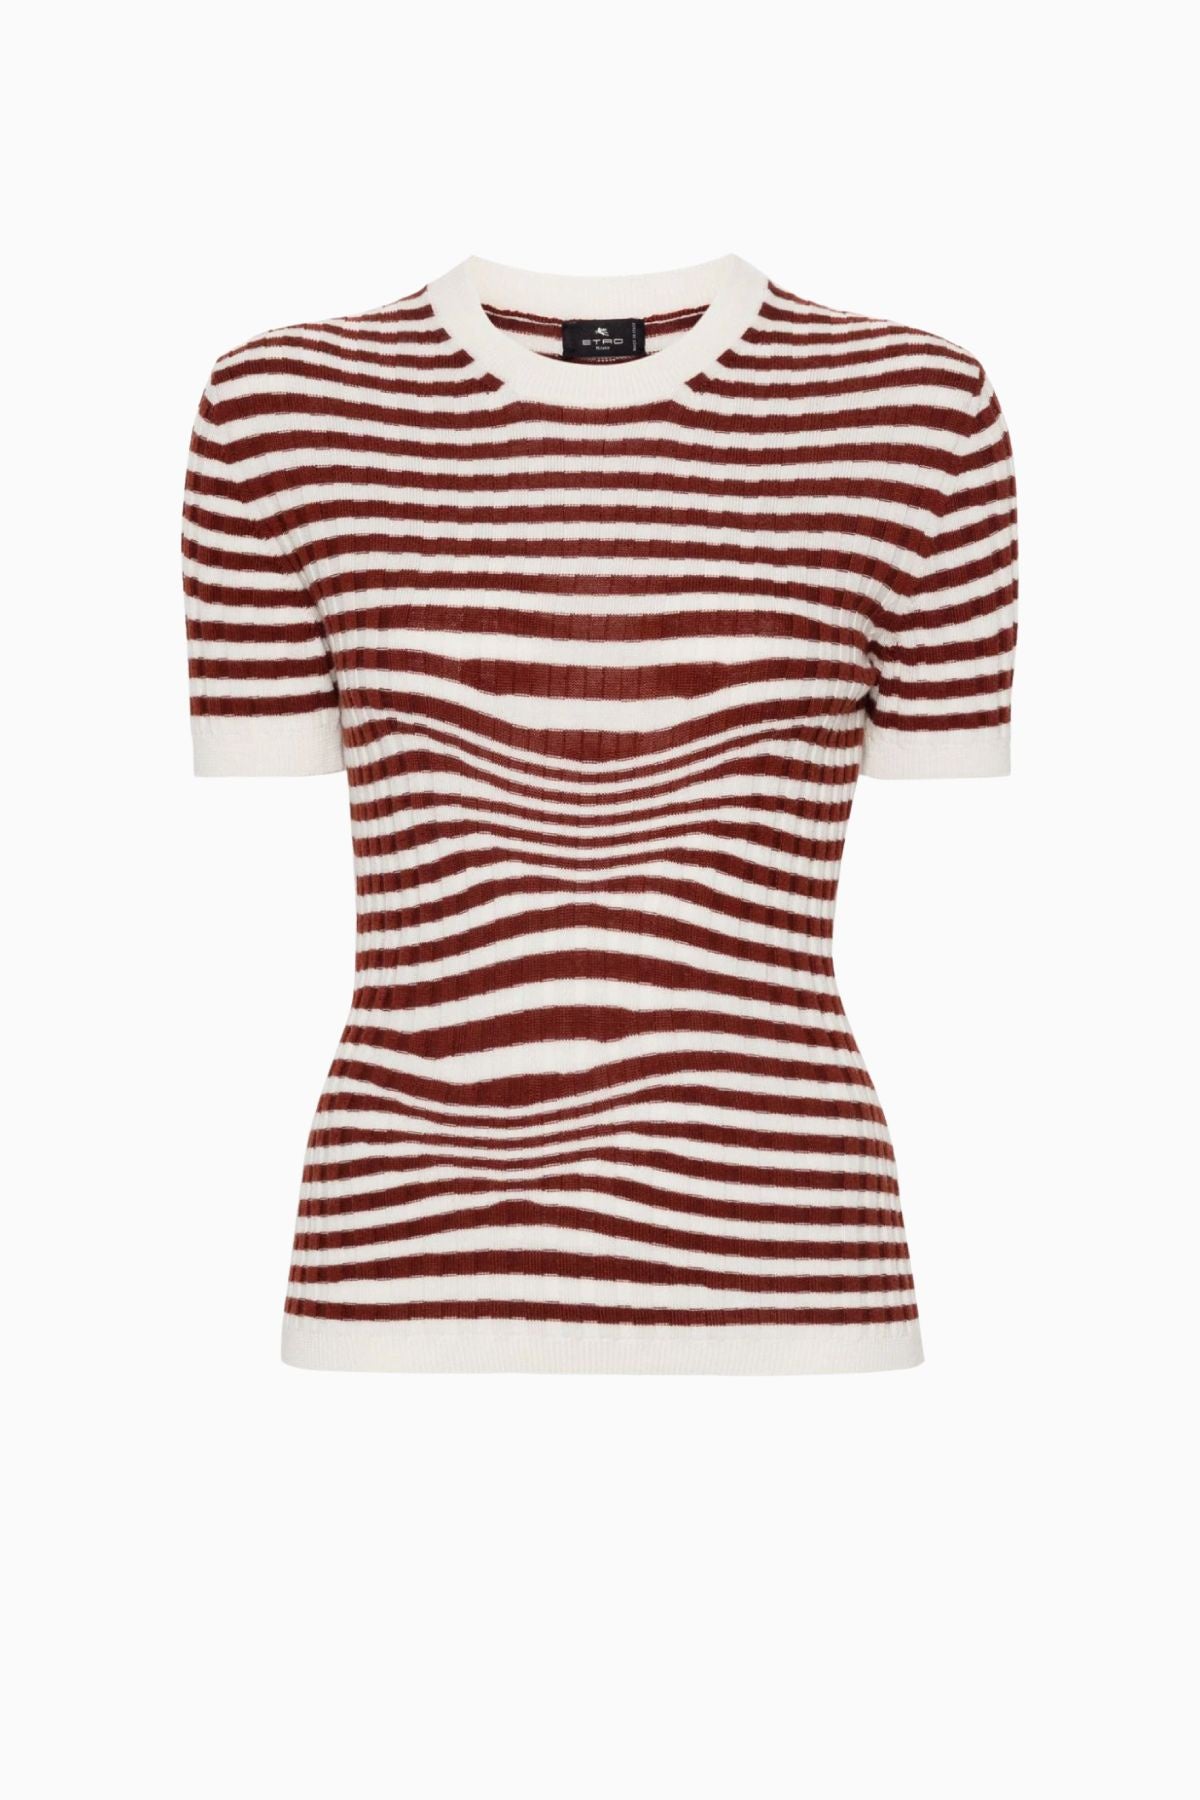 Etro Striped Knitted Short Sleeve Jumper - Red